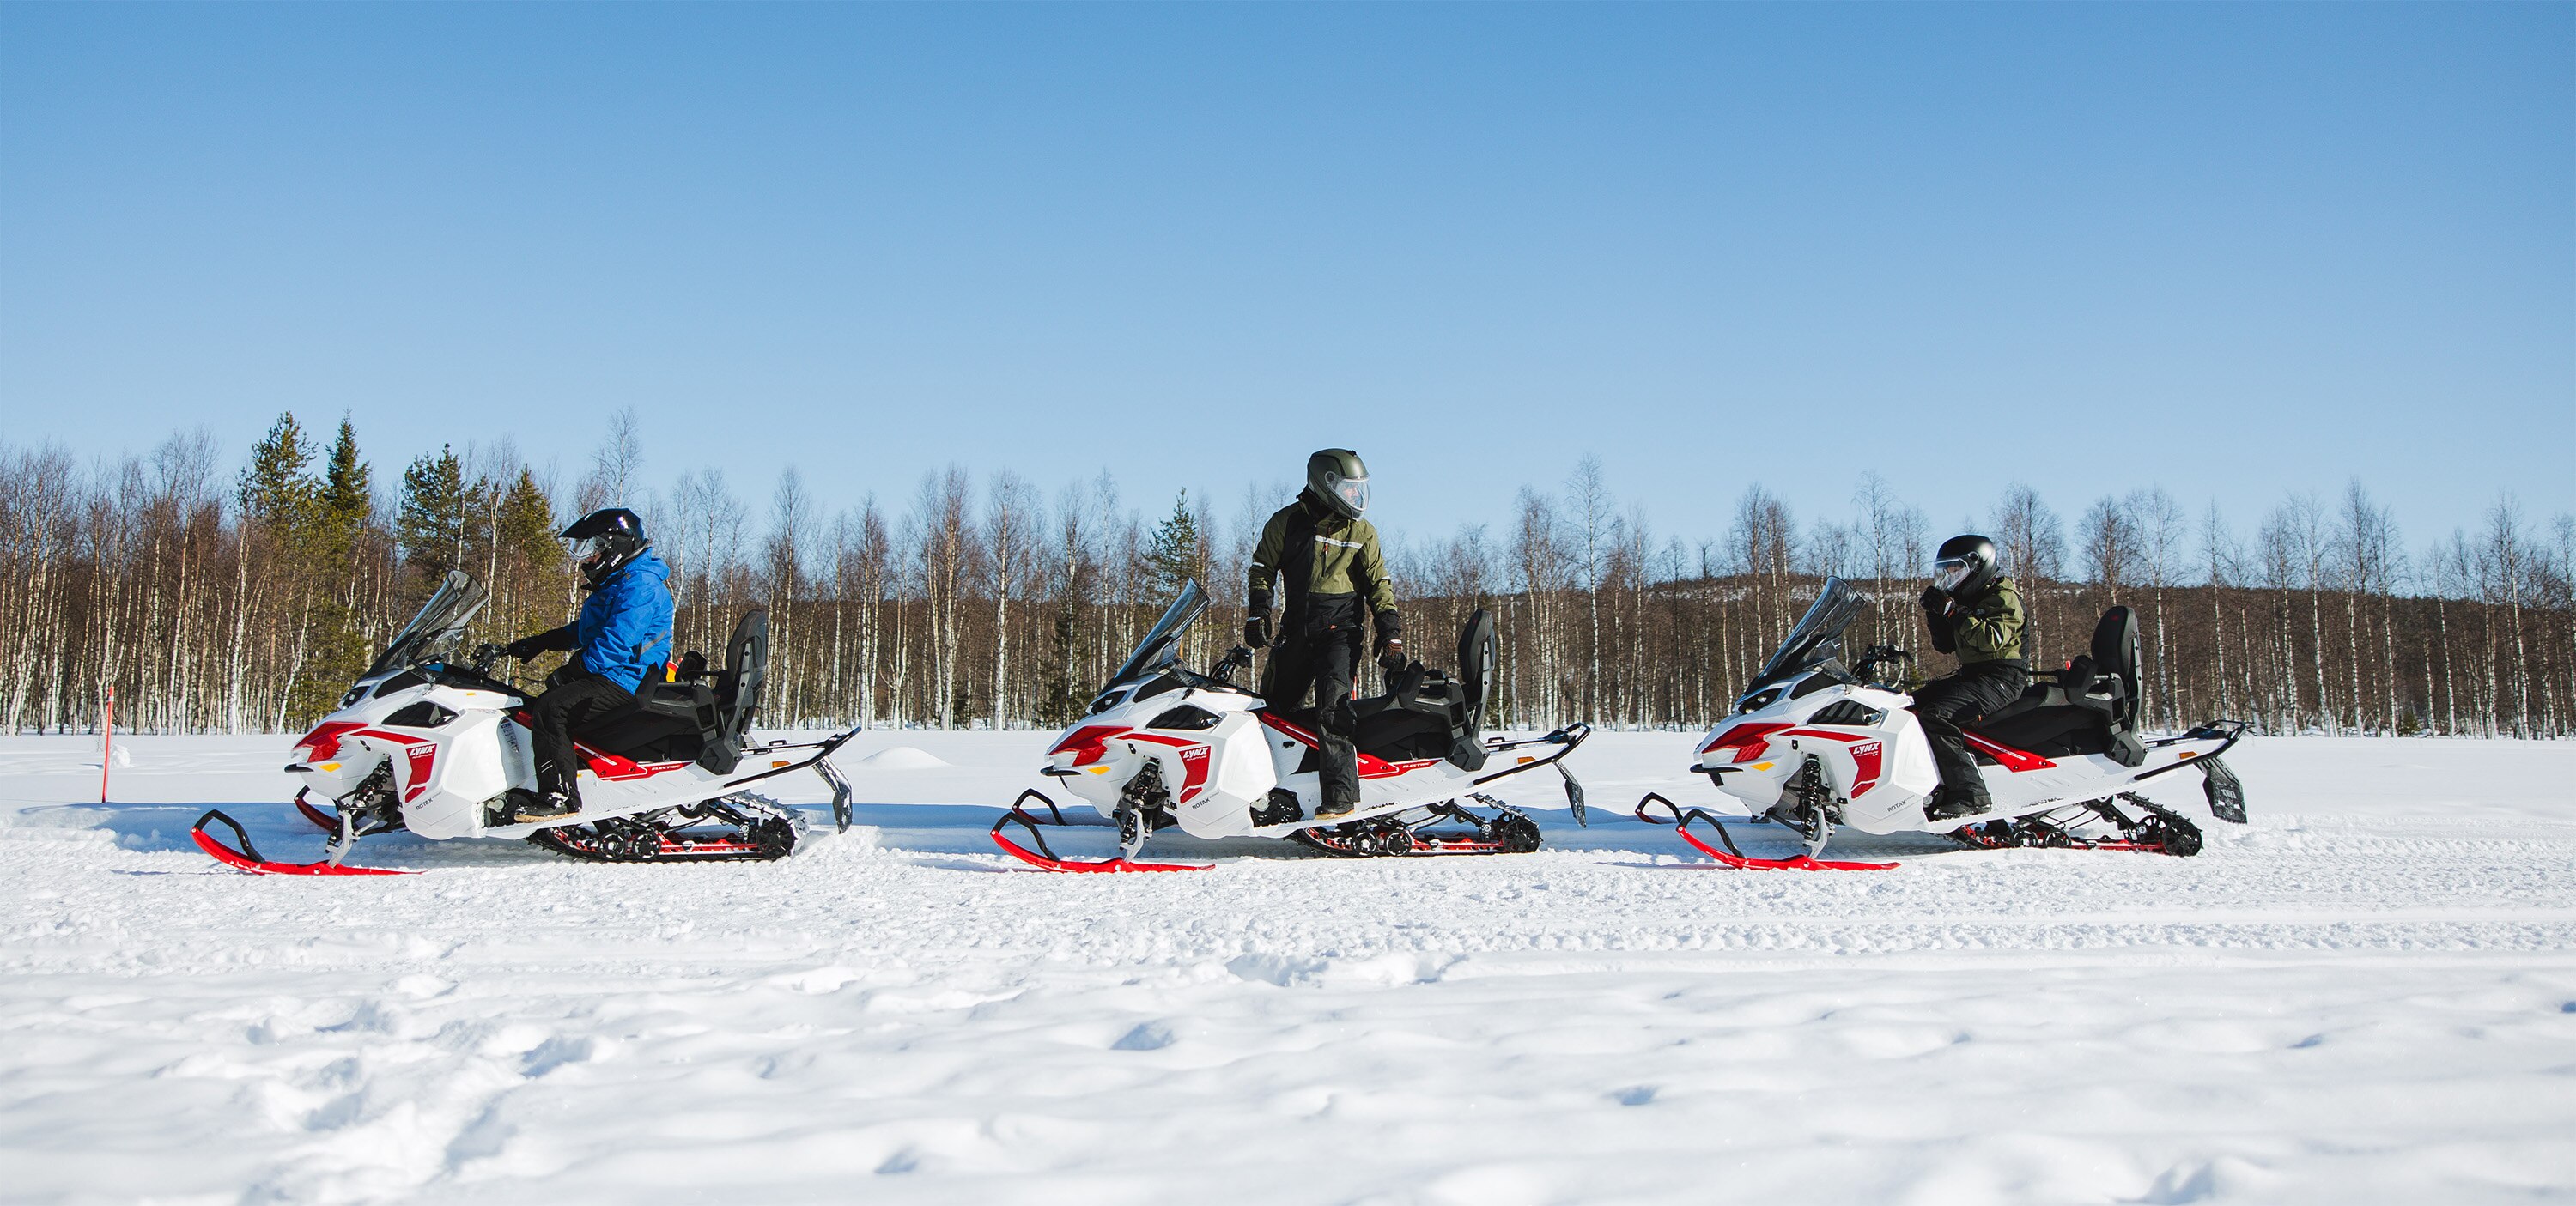 Electric Ski-Doo Grand Touring snowmobile in action in Lapland